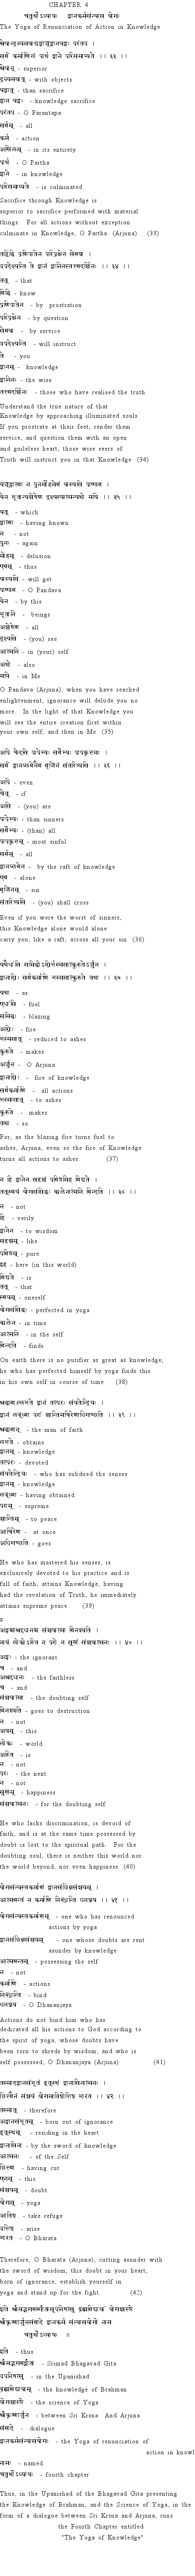 Text of Ch.4_4